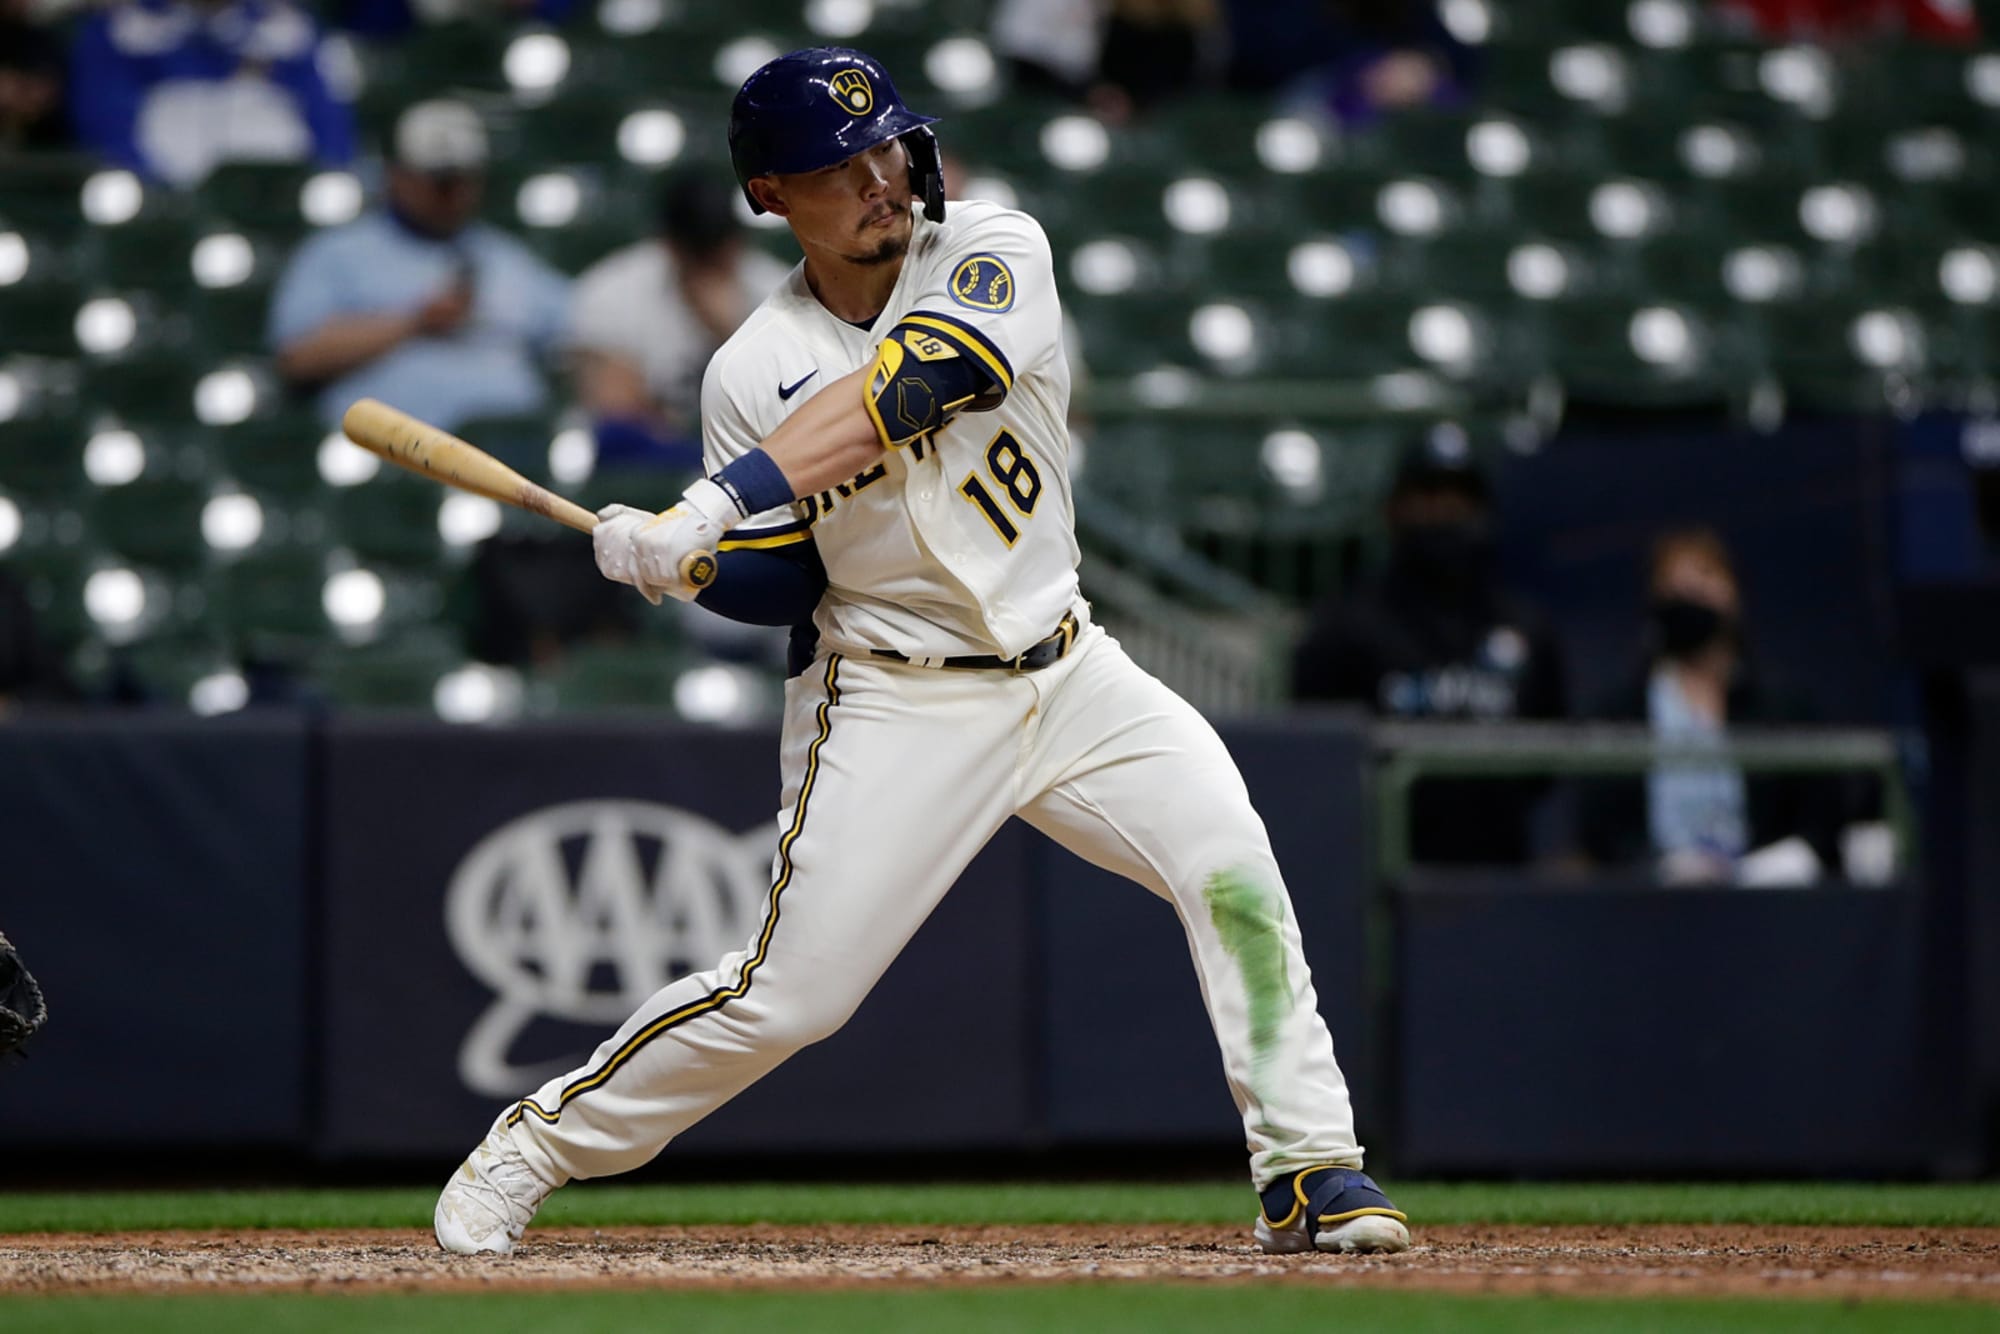 Brewers expected to part ways with INF Keston Hiura